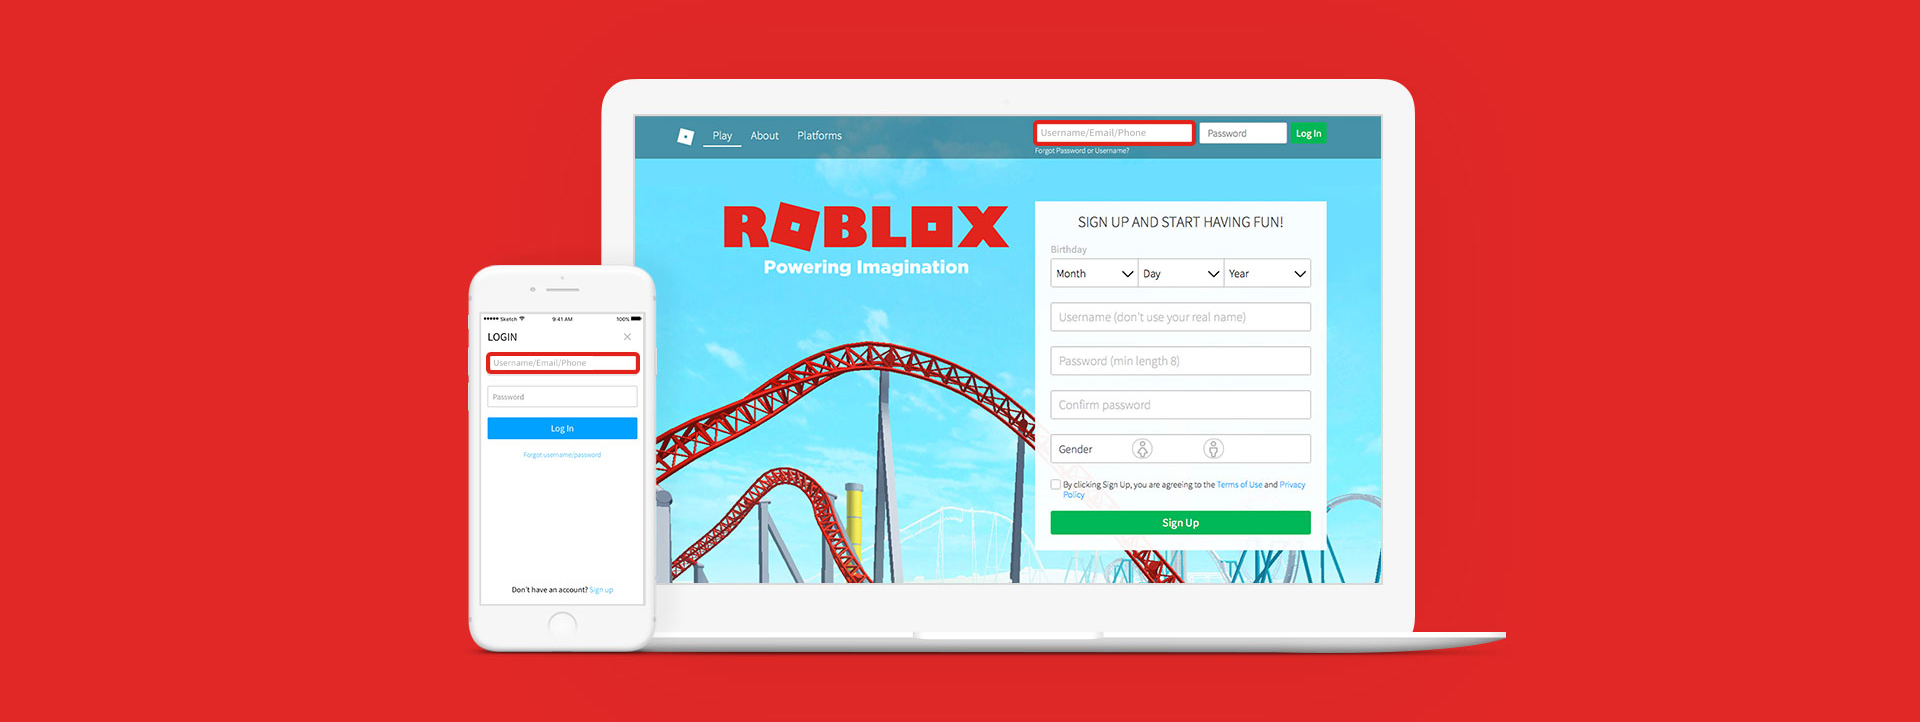 Roblox Login Email